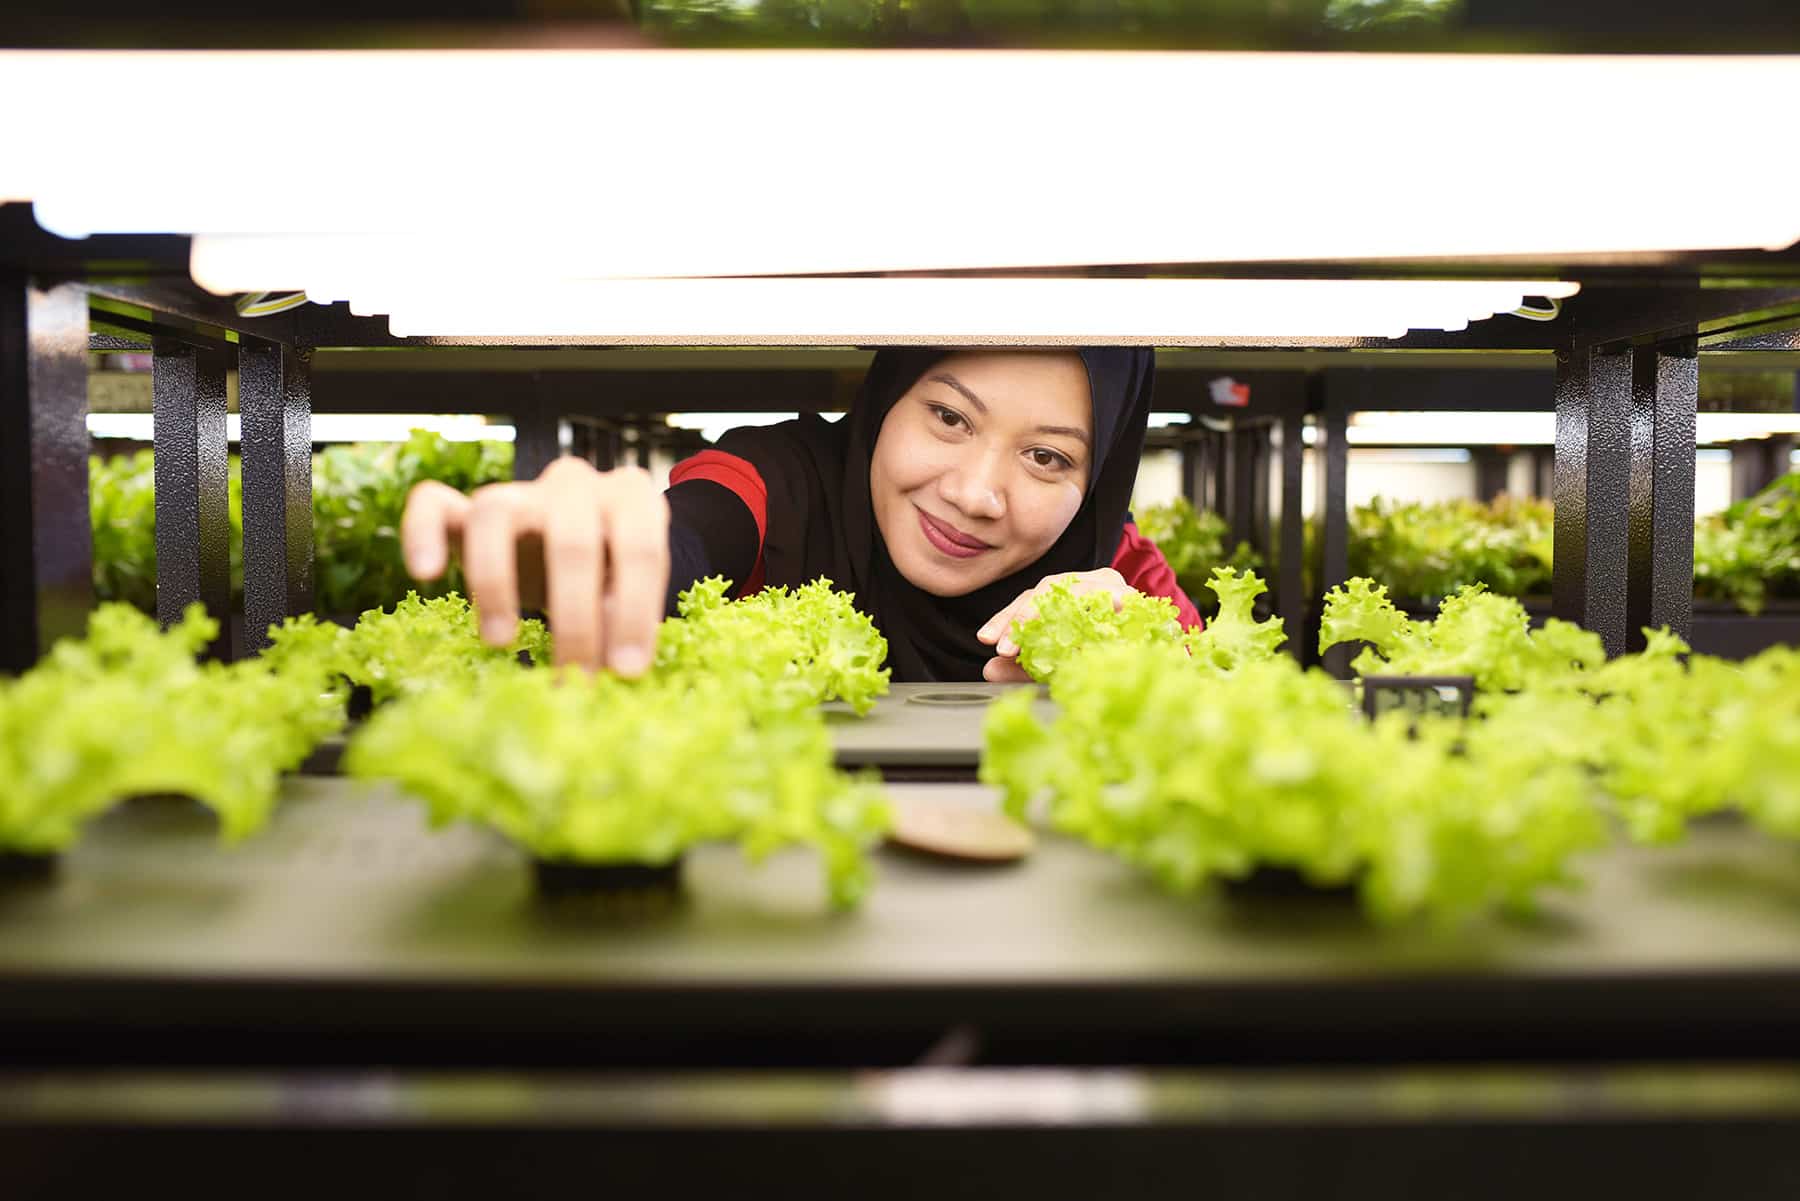 Welcome to Sunway XFarms – the magical place where plants grow without soil!